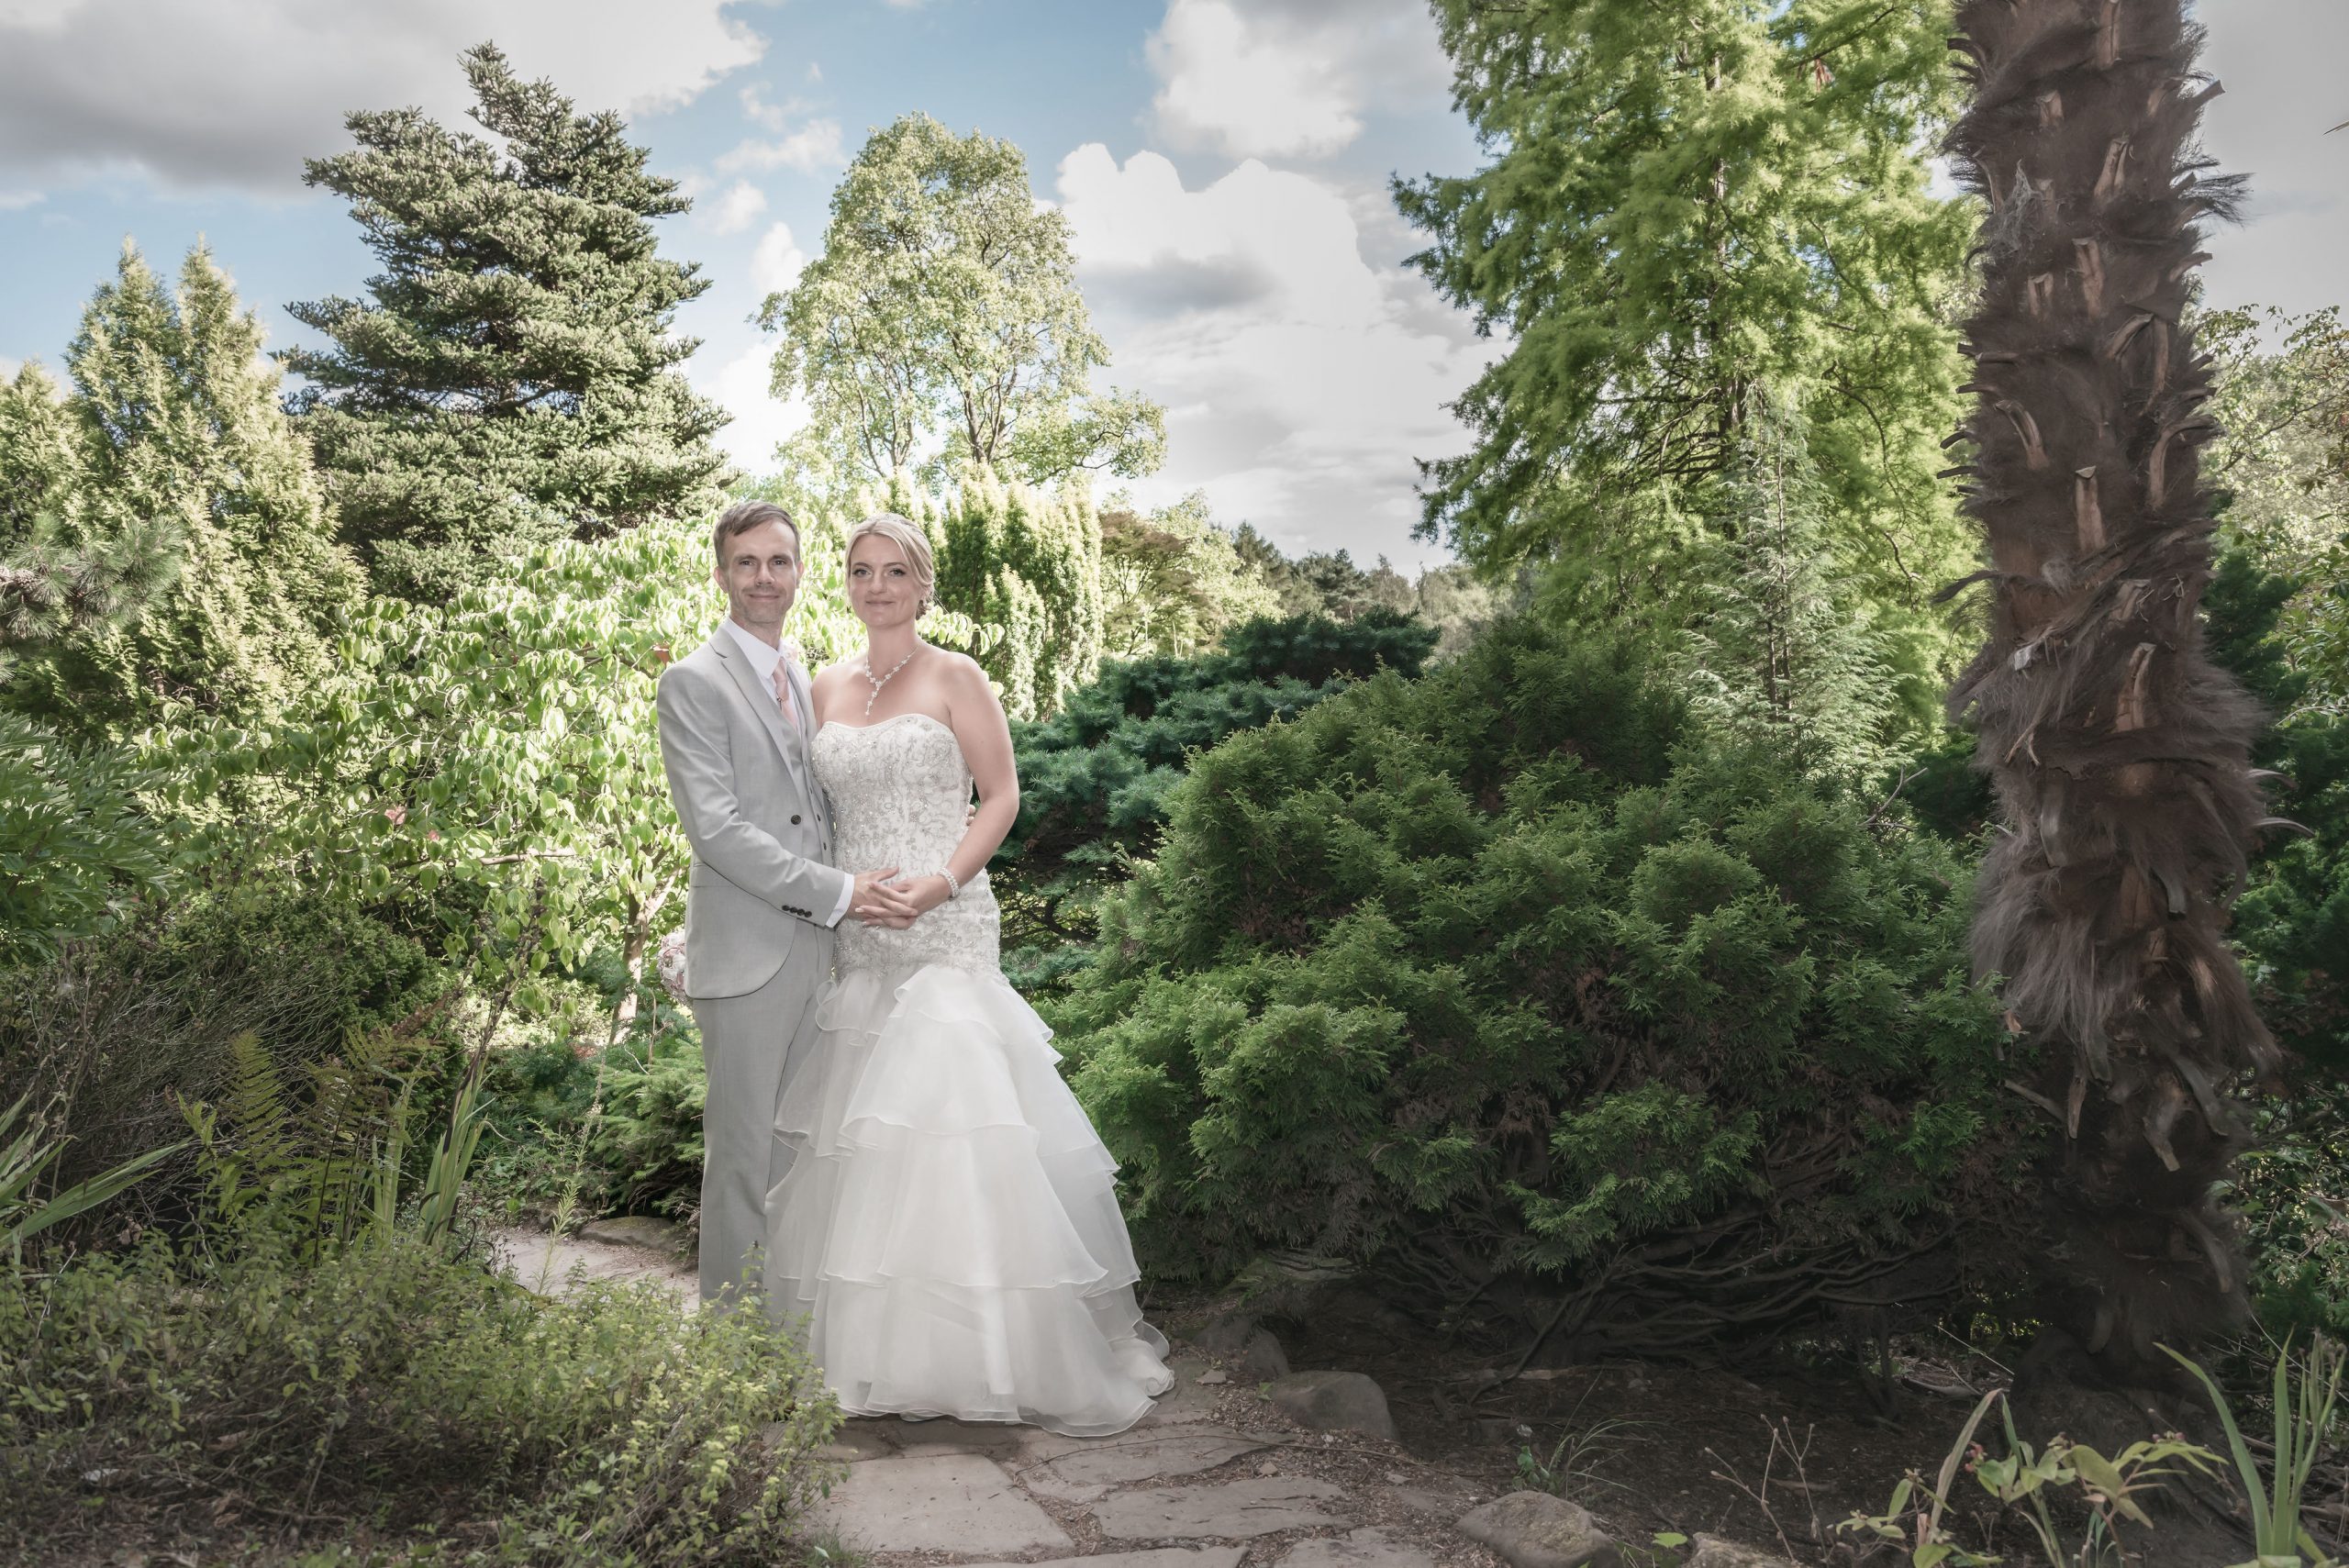 a groom wearing a grey suit holding hands with his bride who is wearing an ivory wedding dress surrounded by trees and greenery in Manchester